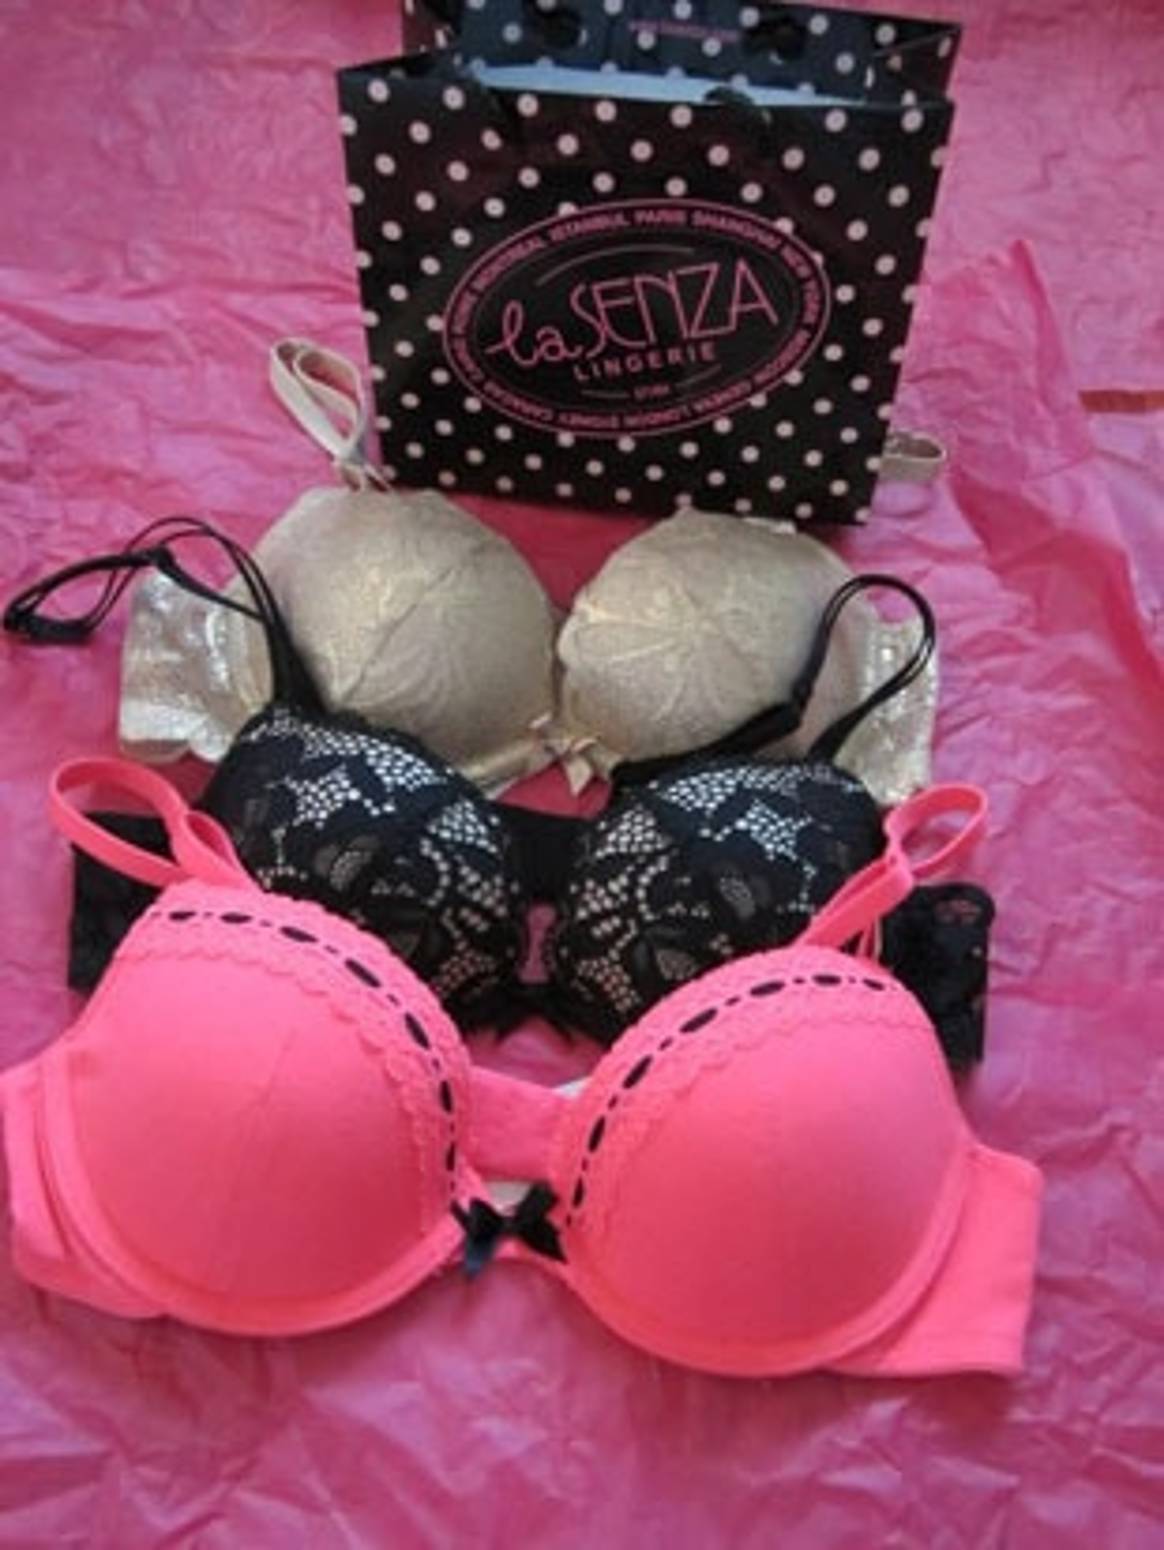 La Senza to stop trading within the UK